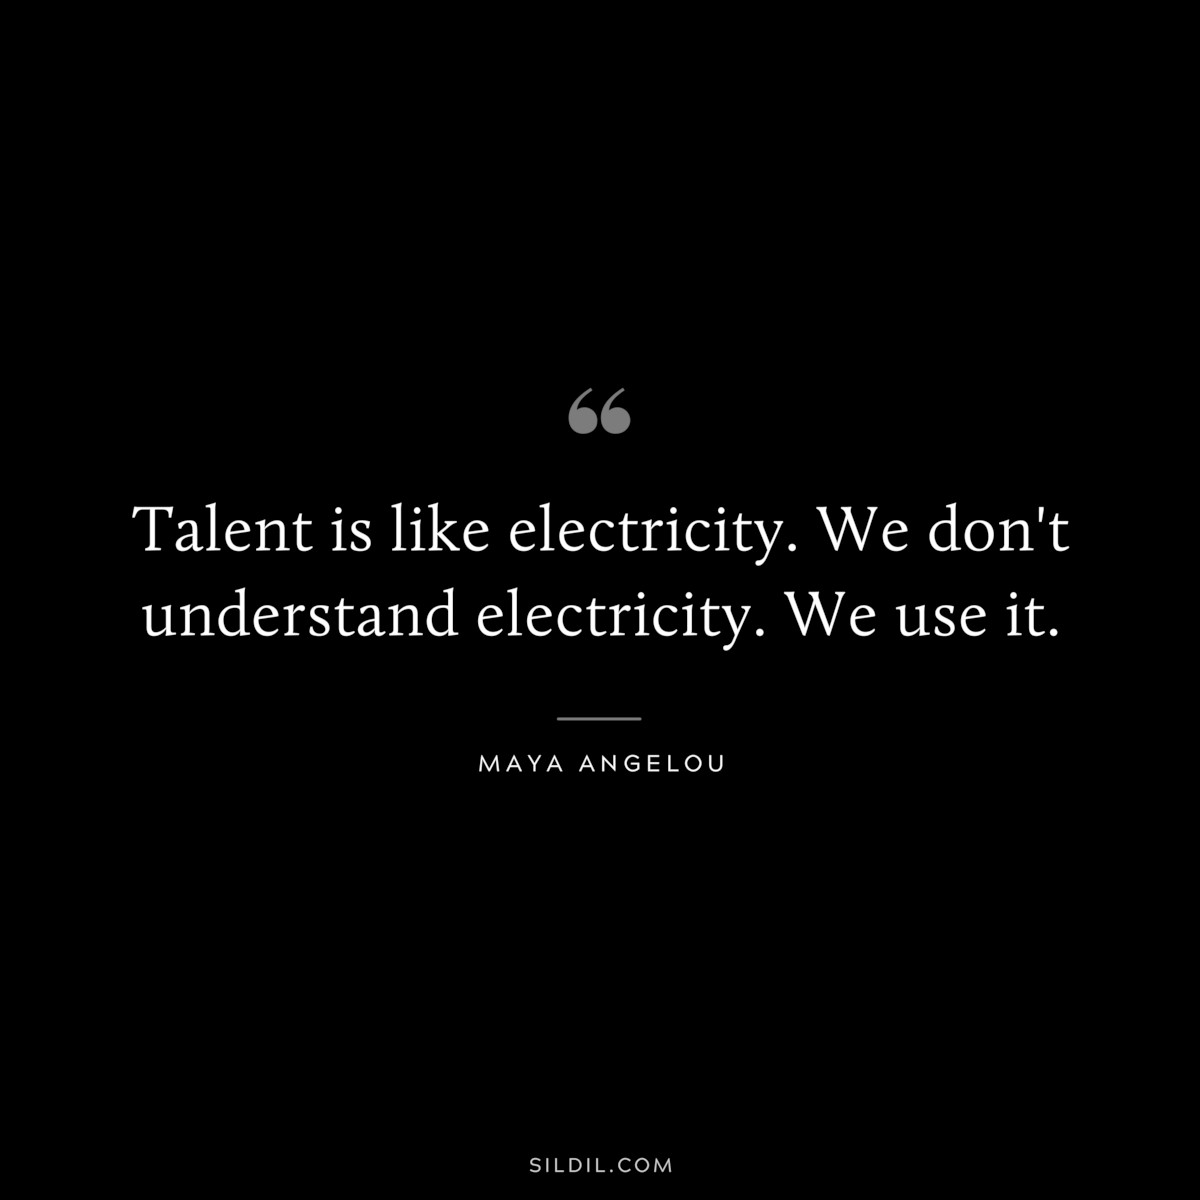 Talent is like electricity. We don't understand electricity. We use it. ― Maya Angelou